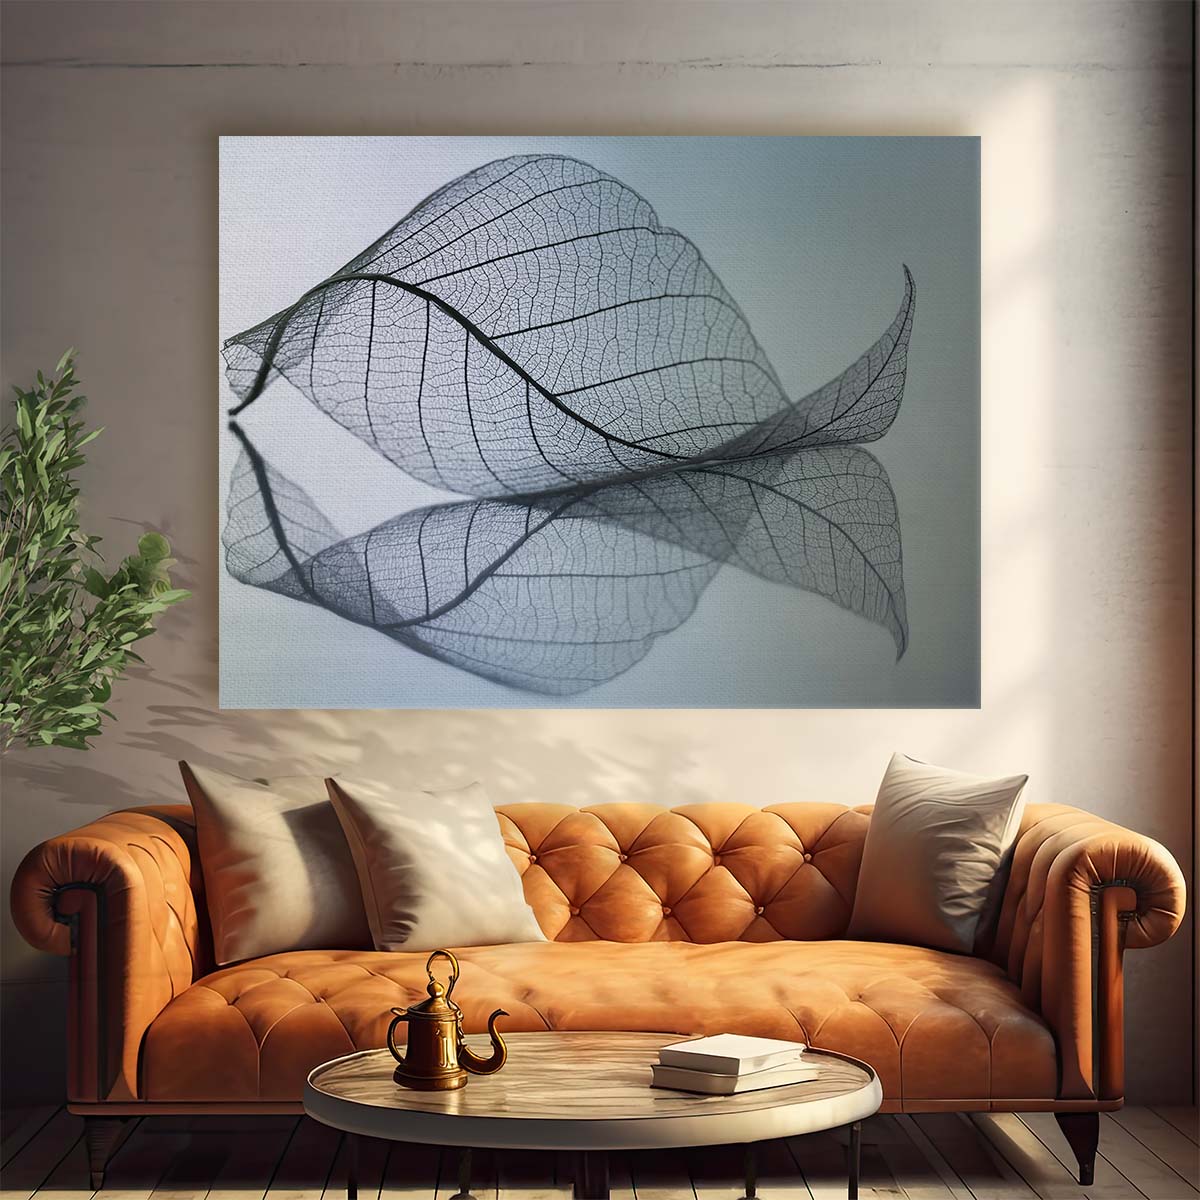 Delicate Vein Skeleton Leaf Macro Wall Art by Luxuriance Designs. Made in USA.